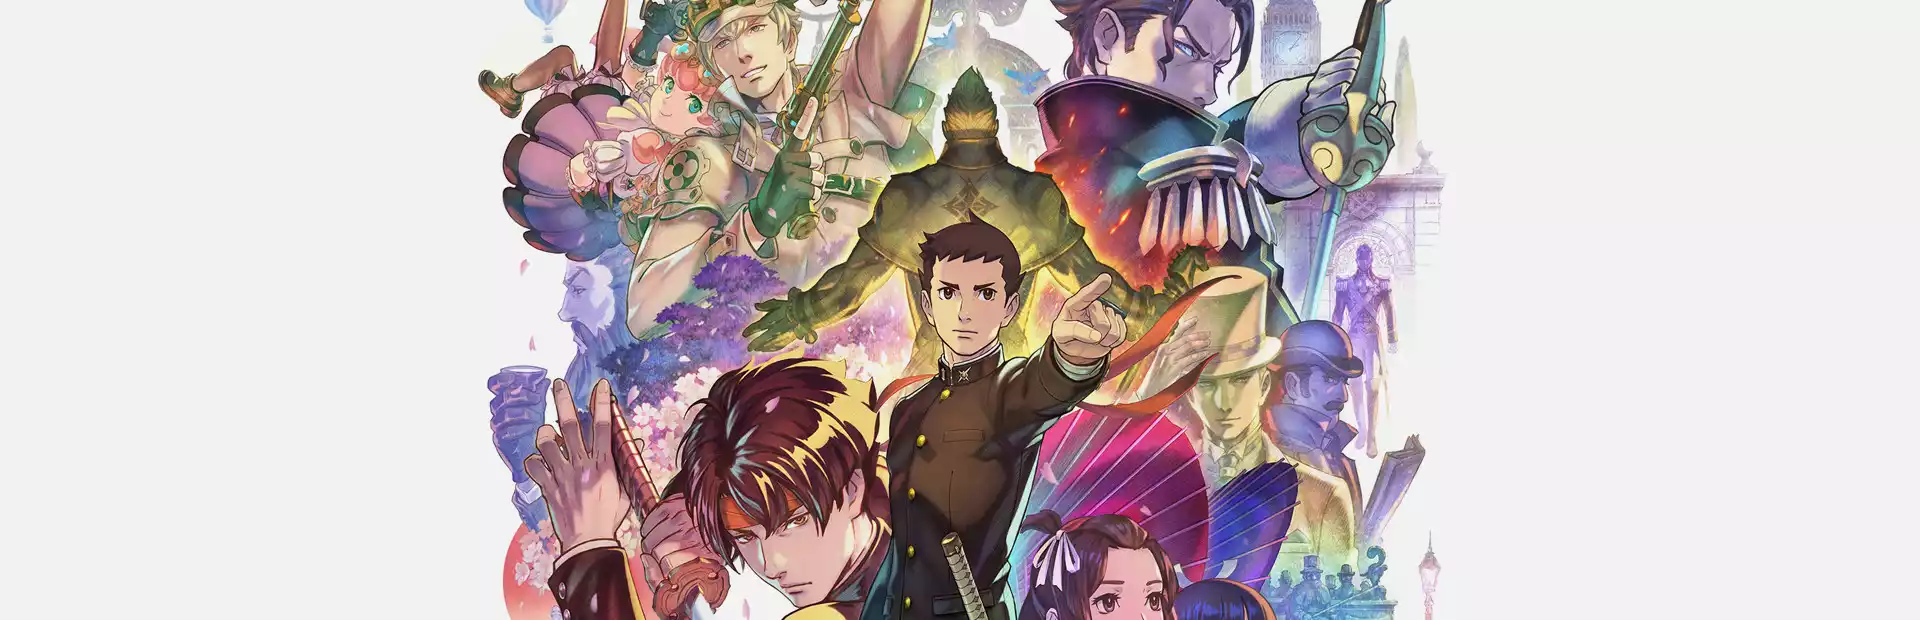 The Great Ace Attorney Chronicles Steam Key China